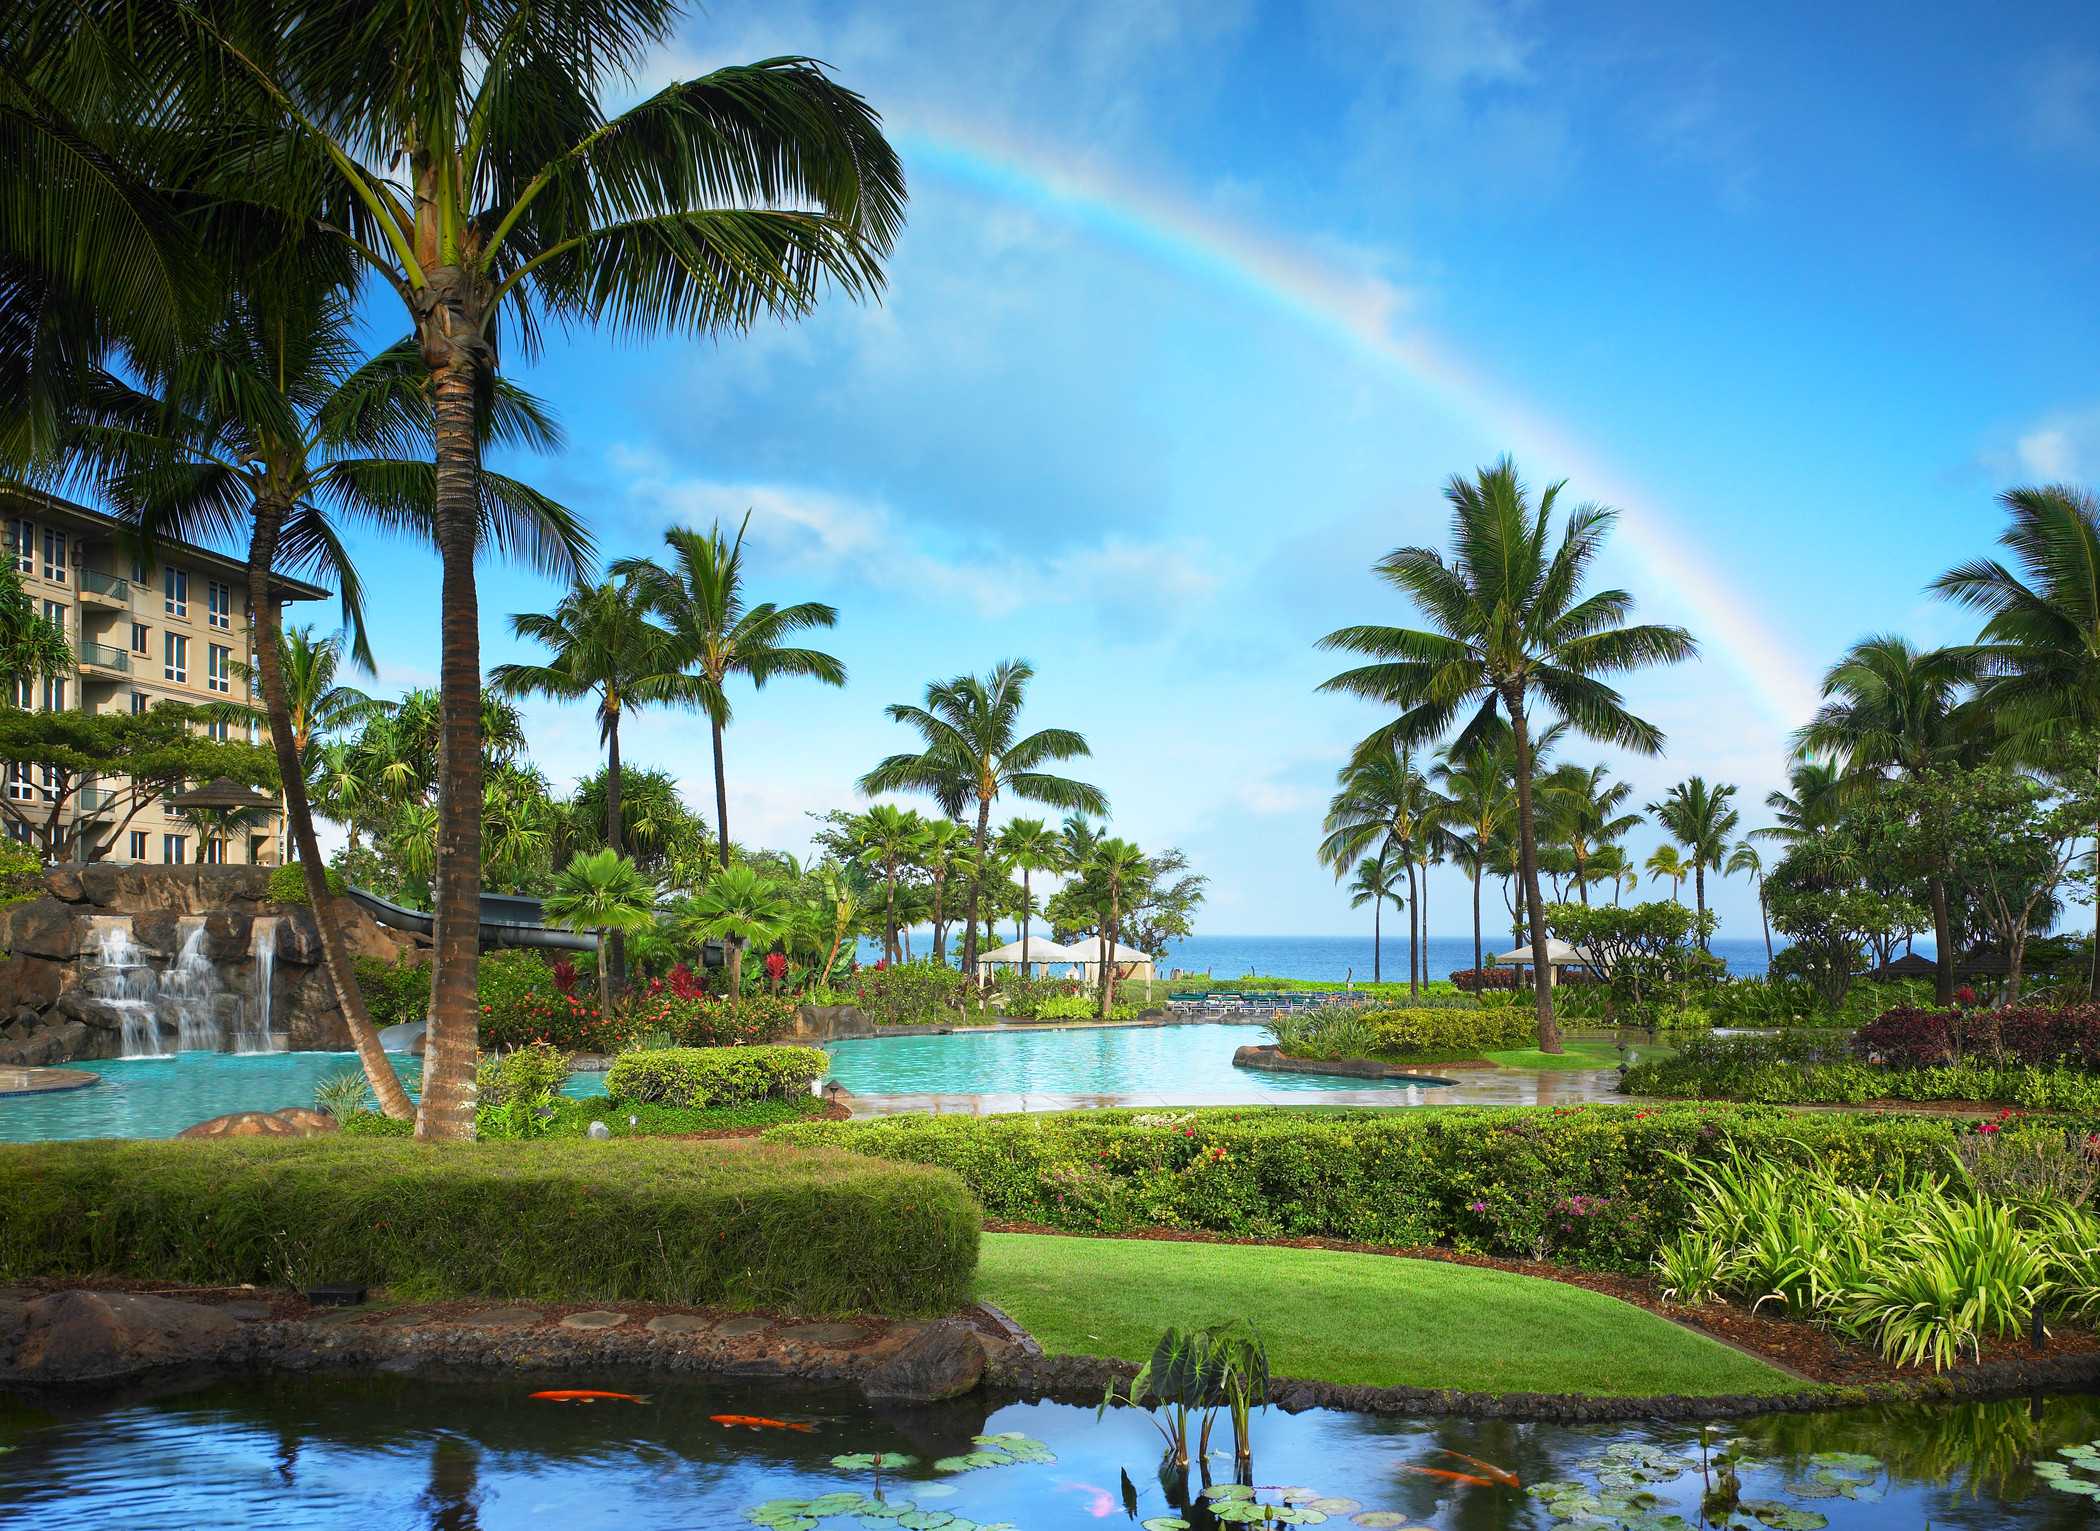 New Maui Timeshare and Maui Timeshare Resales Update